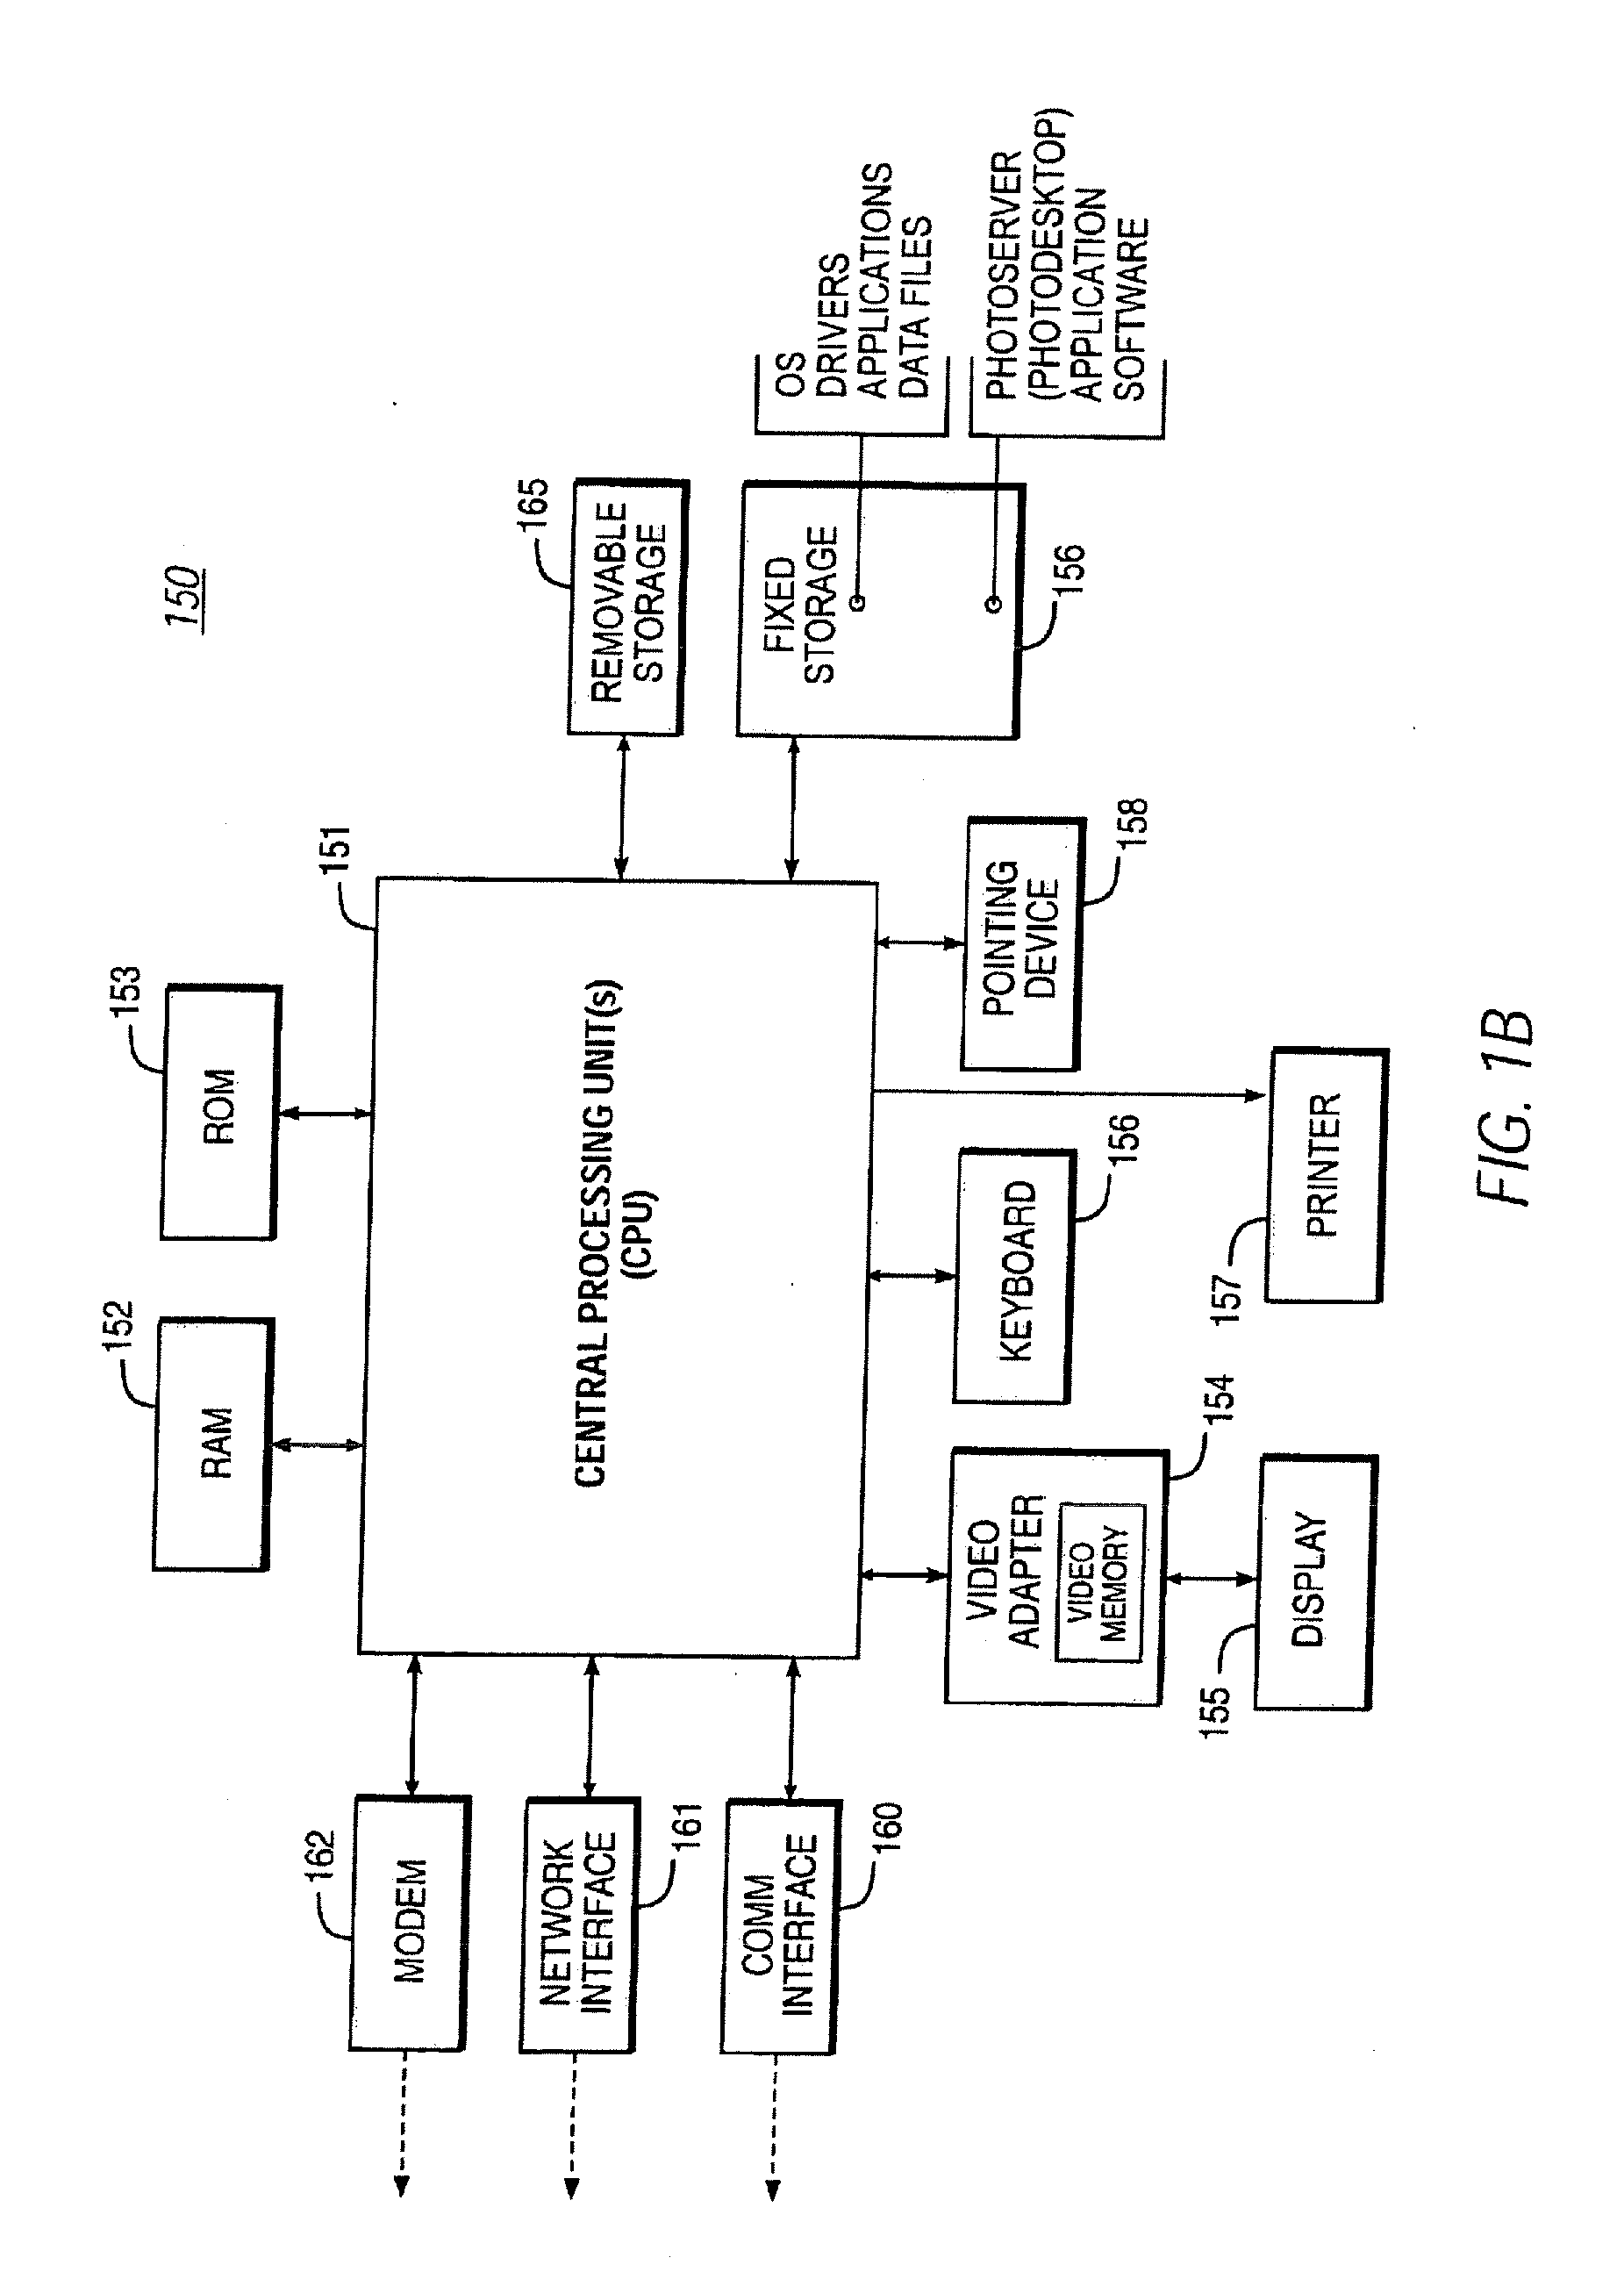 Digital Camera Device and Methodology for Distributed Processing and Wireless Transmission of Digital Images